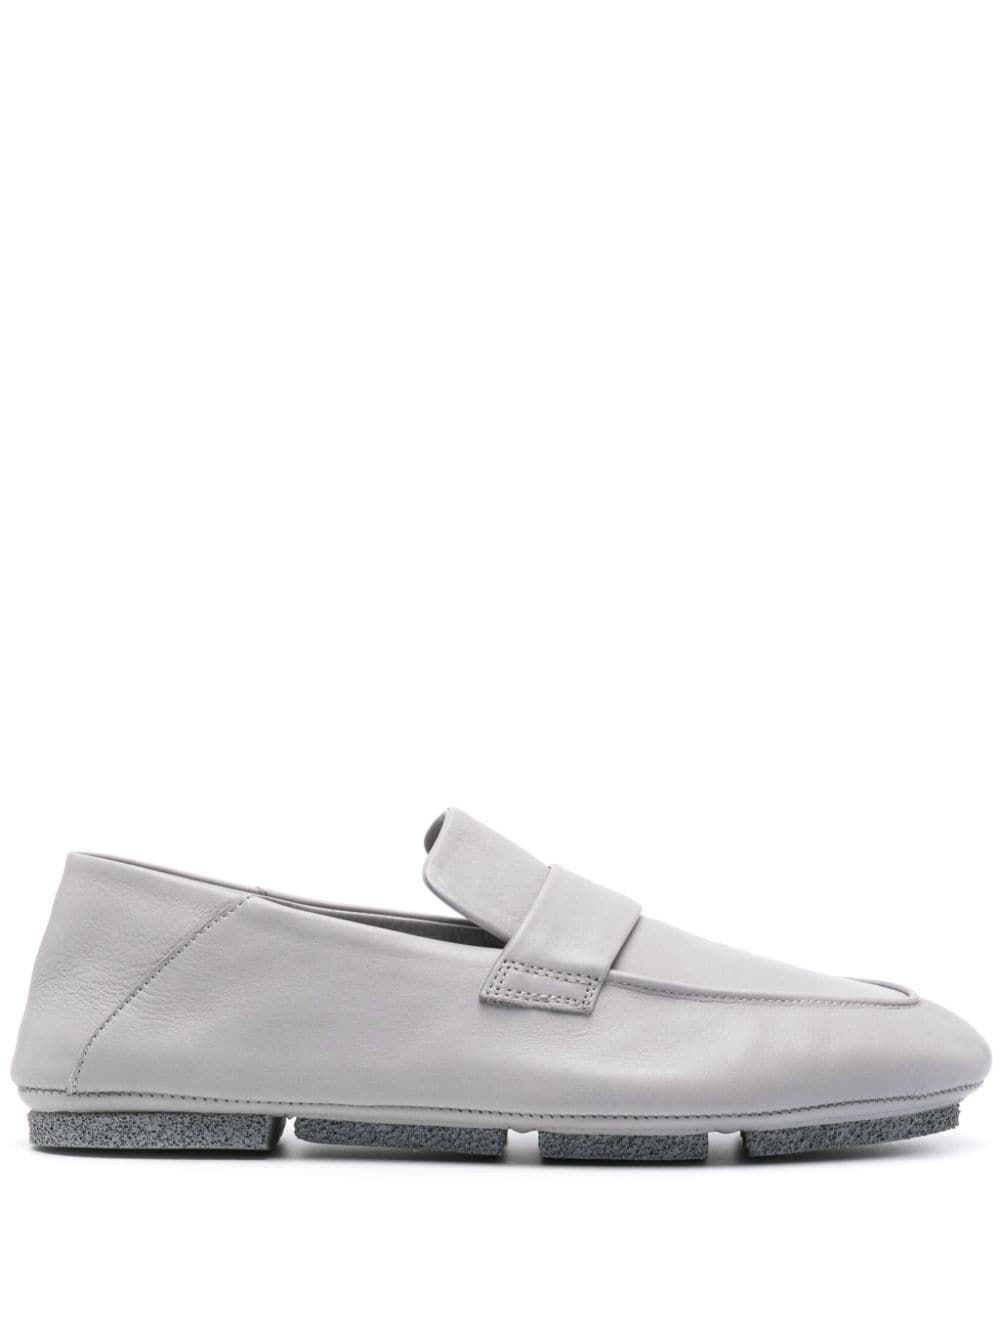 Officine Creative C-Side nappa leather loafers - Grey